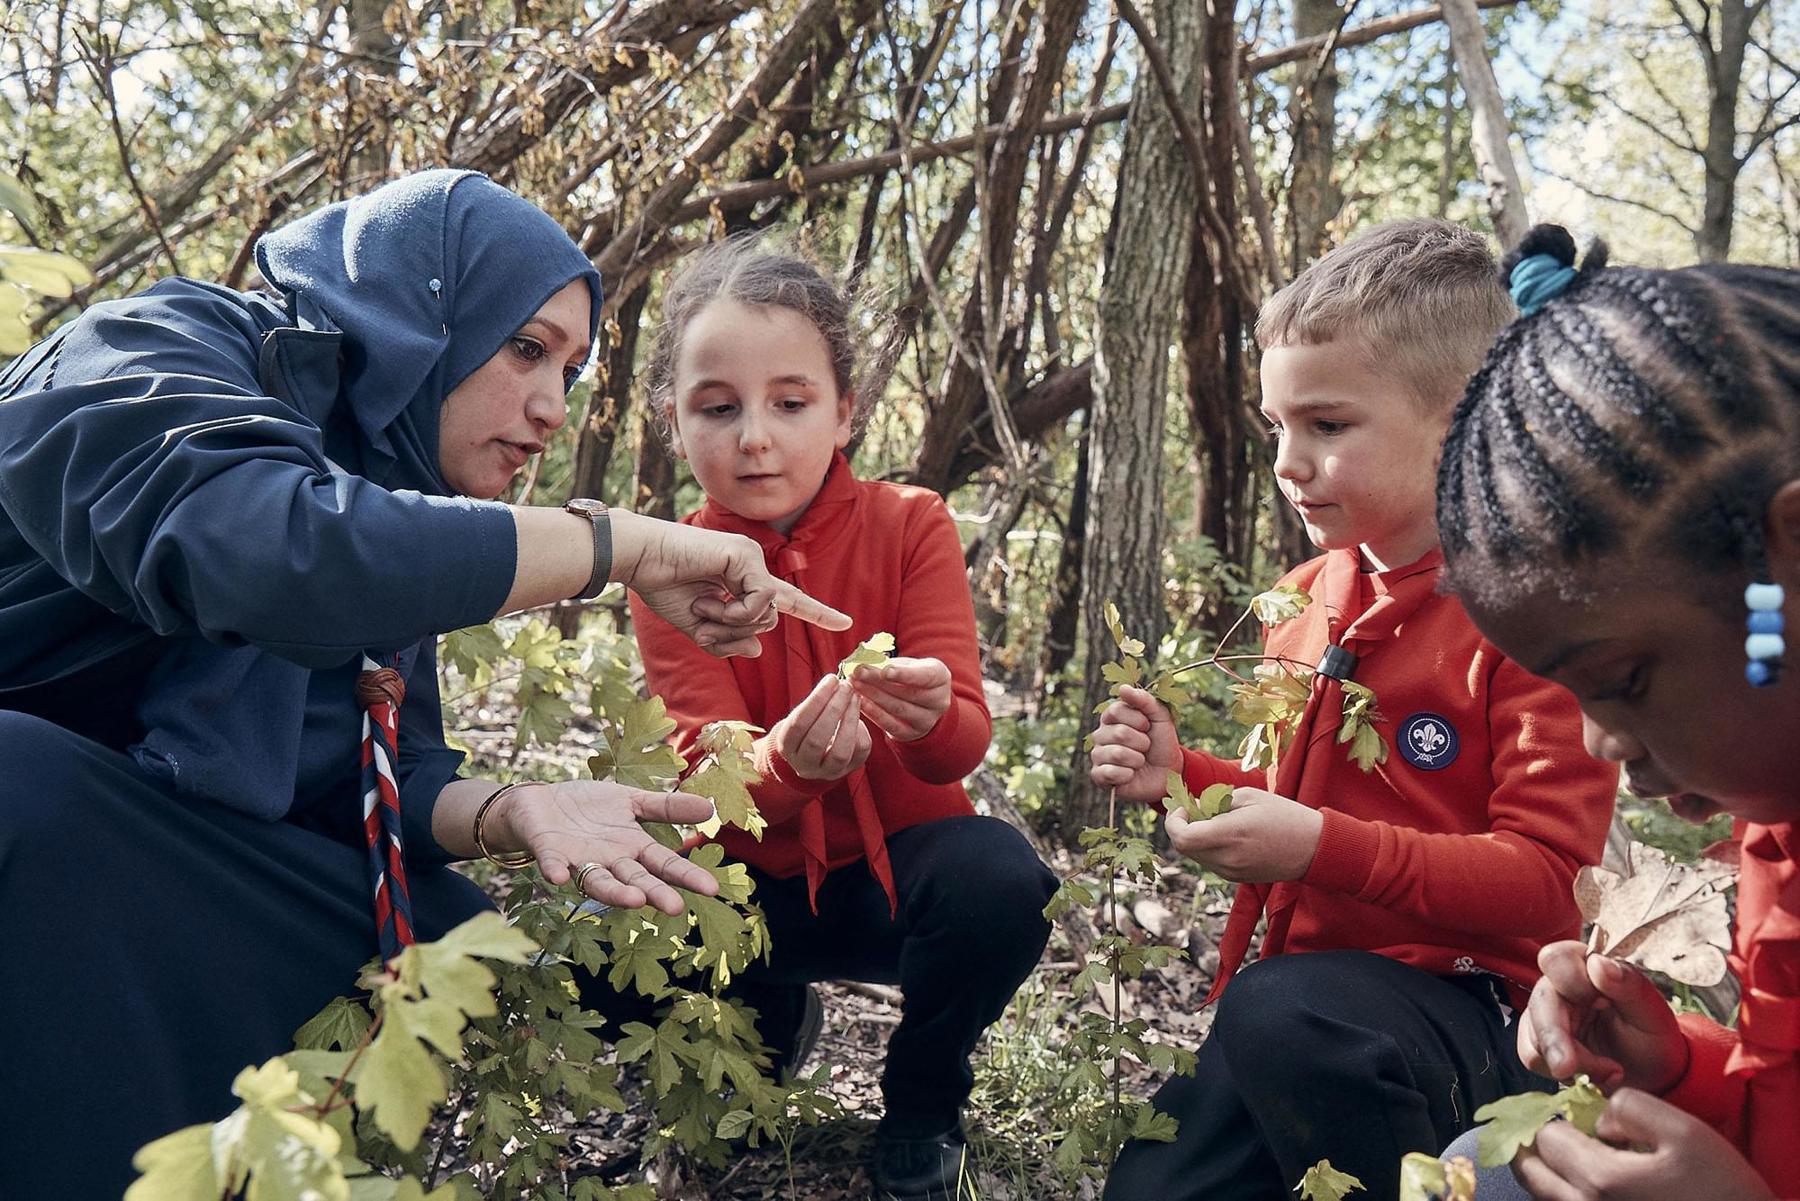 A female Scout volunteer is crouched down in the woodland with three Squirrel Scouts, one boy and two girls. They are looking at and holding leaves. One girl is showing a leaf to the leader, who is talking and pointing at part of the leaf.